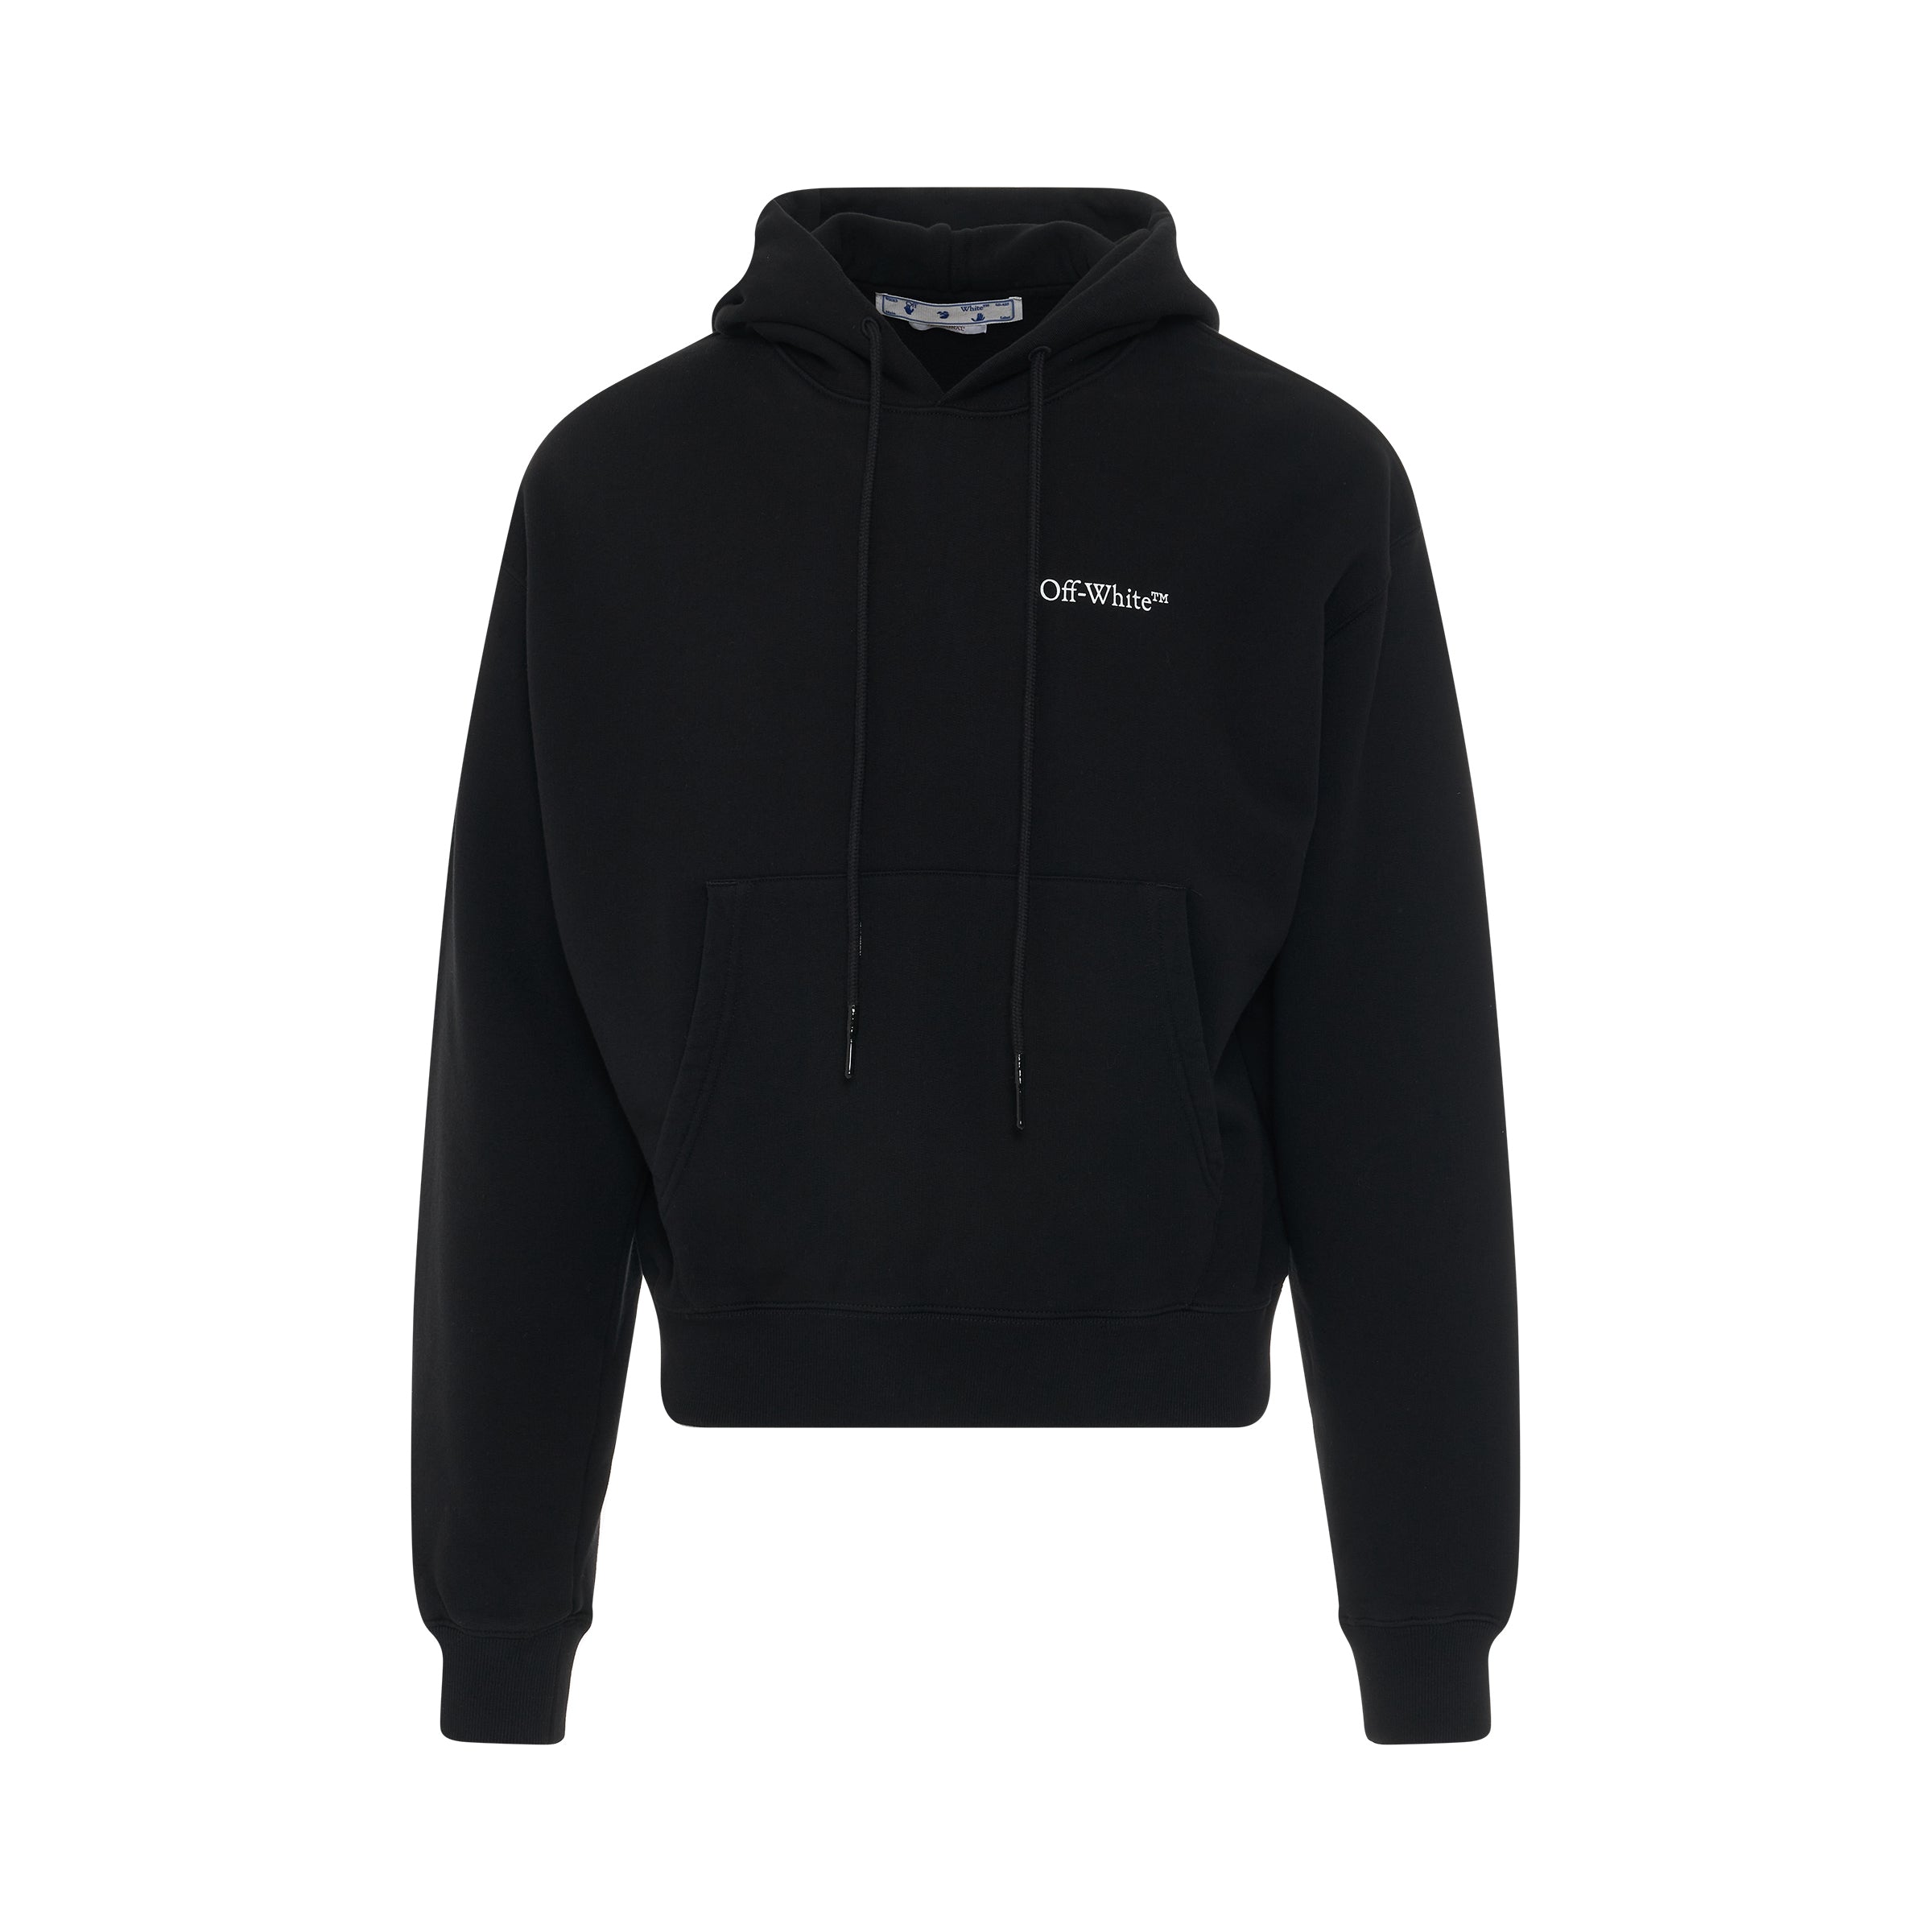 OFF-WHITE Caravaggio Crowning Oversize Fit Hoodie in Black/White – MARAIS